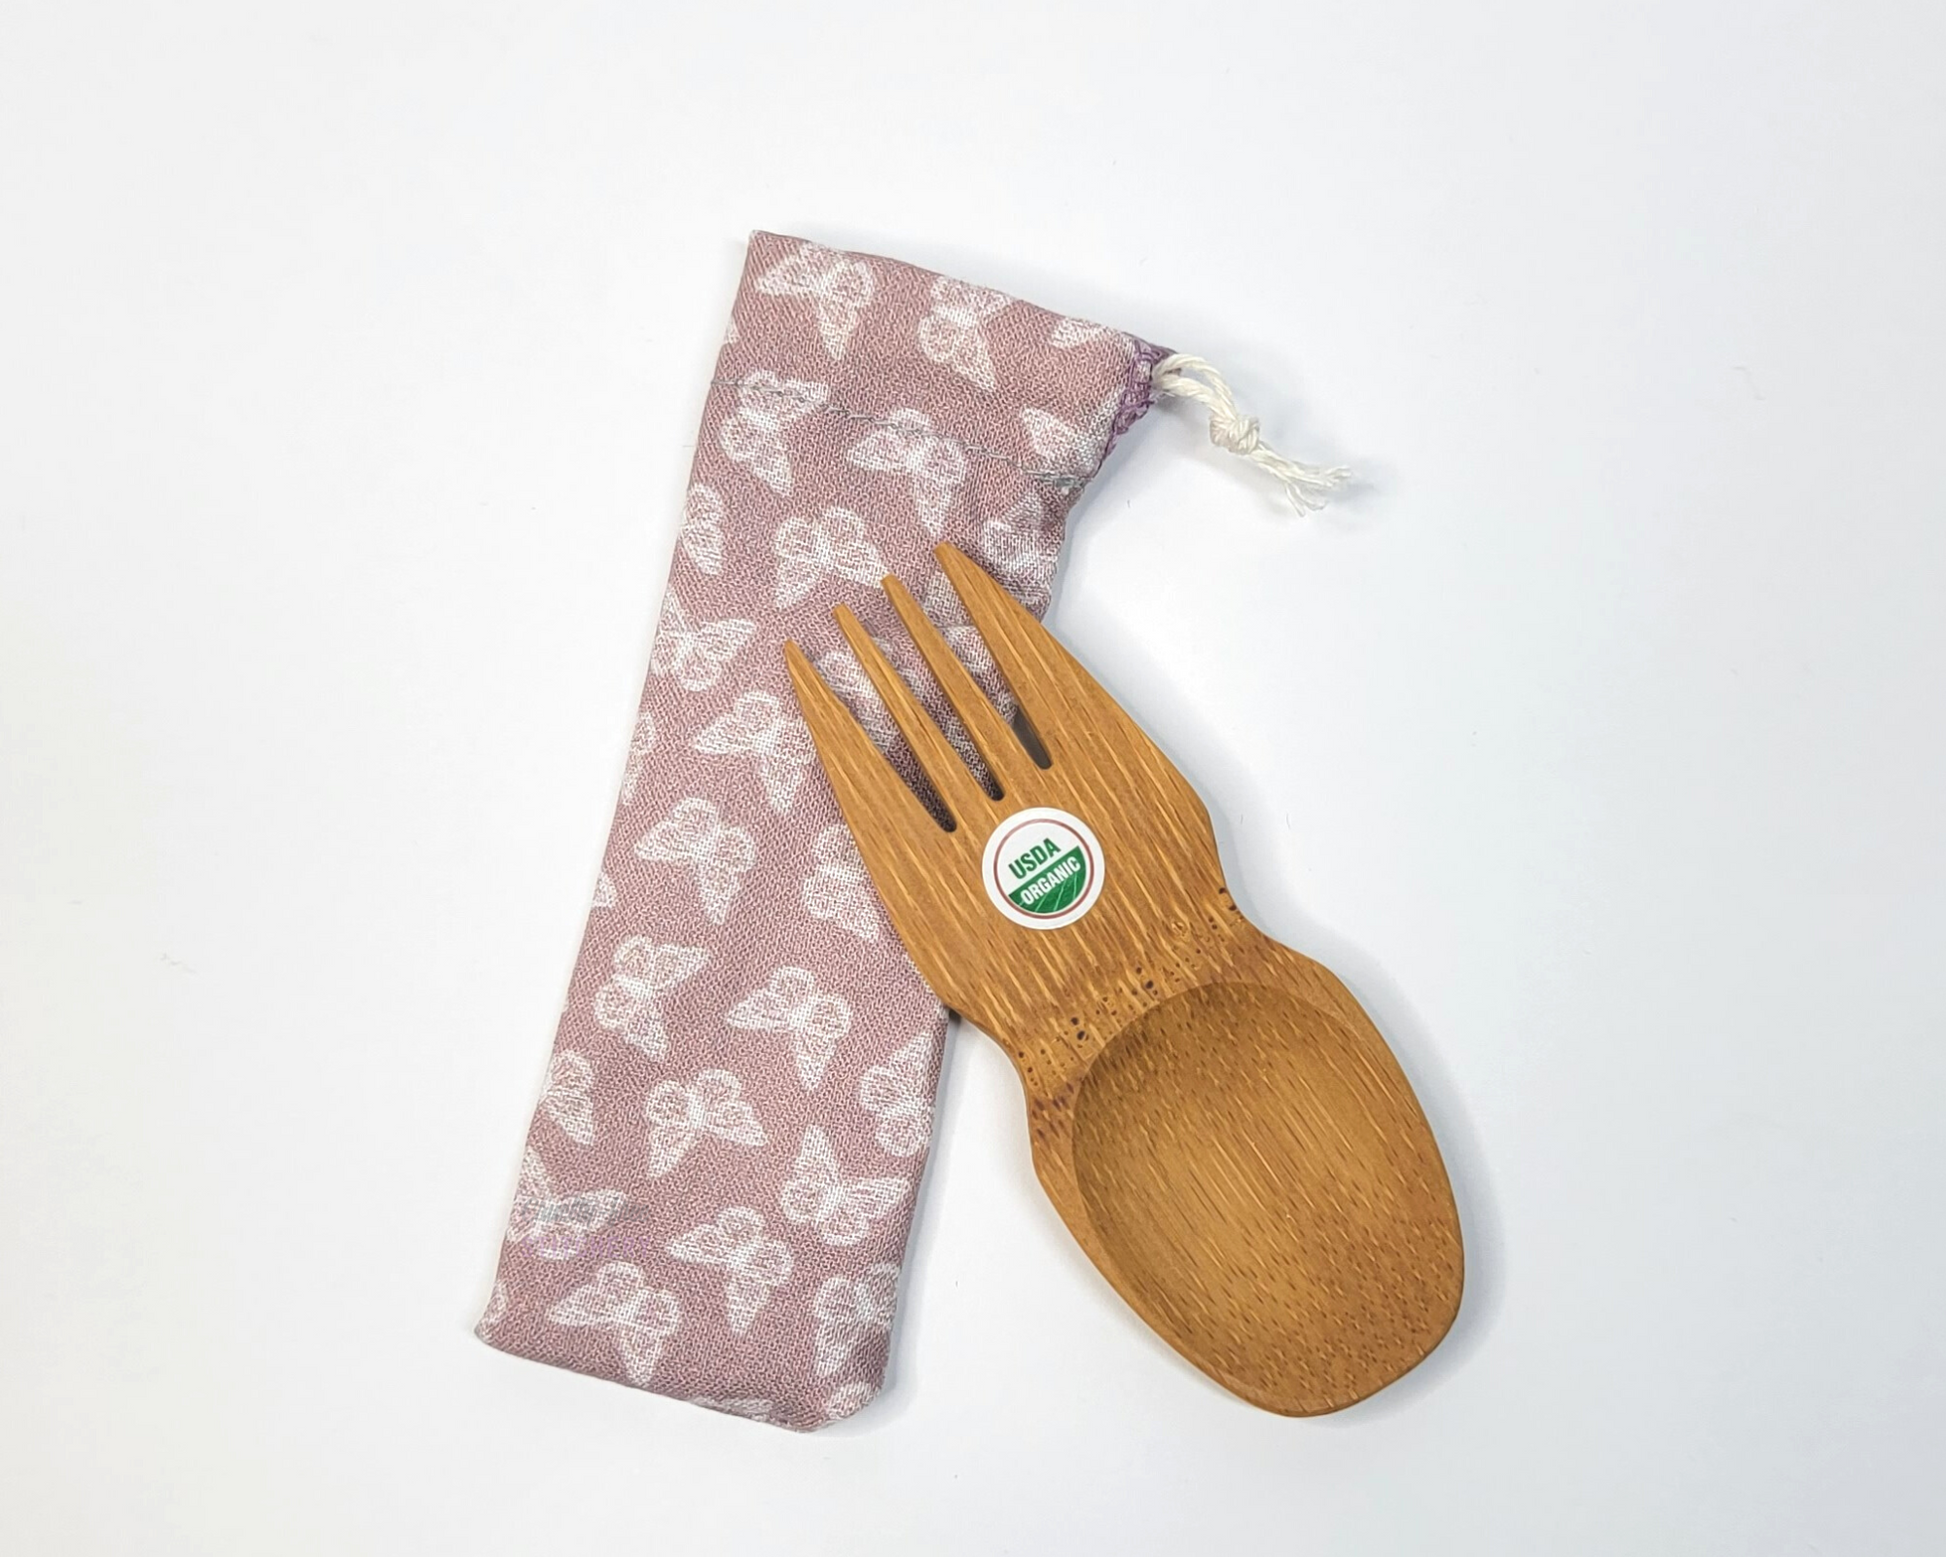 Reusable bamboo spork with pouch. The pouch is a light mauve pink with tiny white butterflies. The pouch is sitting diagonally with the spork partially on top pointing the other way. The spork is small, a double ended fork and spoon.